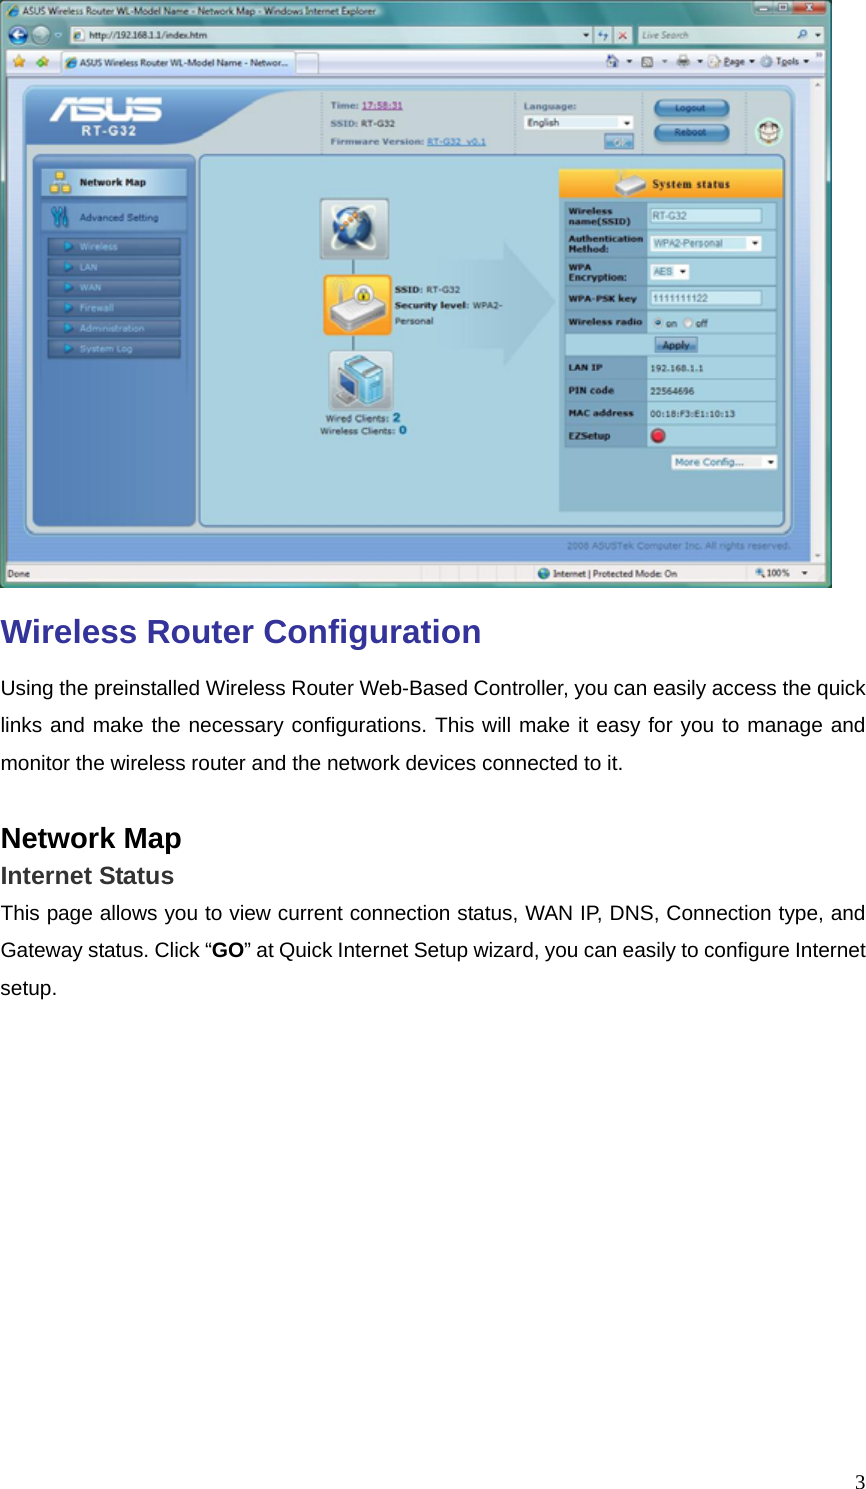  3 Wireless Router Configuration Using the preinstalled Wireless Router Web-Based Controller, you can easily access the quick links and make the necessary configurations. This will make it easy for you to manage and monitor the wireless router and the network devices connected to it.  Network Map Internet Status This page allows you to view current connection status, WAN IP, DNS, Connection type, and Gateway status. Click “GO” at Quick Internet Setup wizard, you can easily to configure Internet setup.  